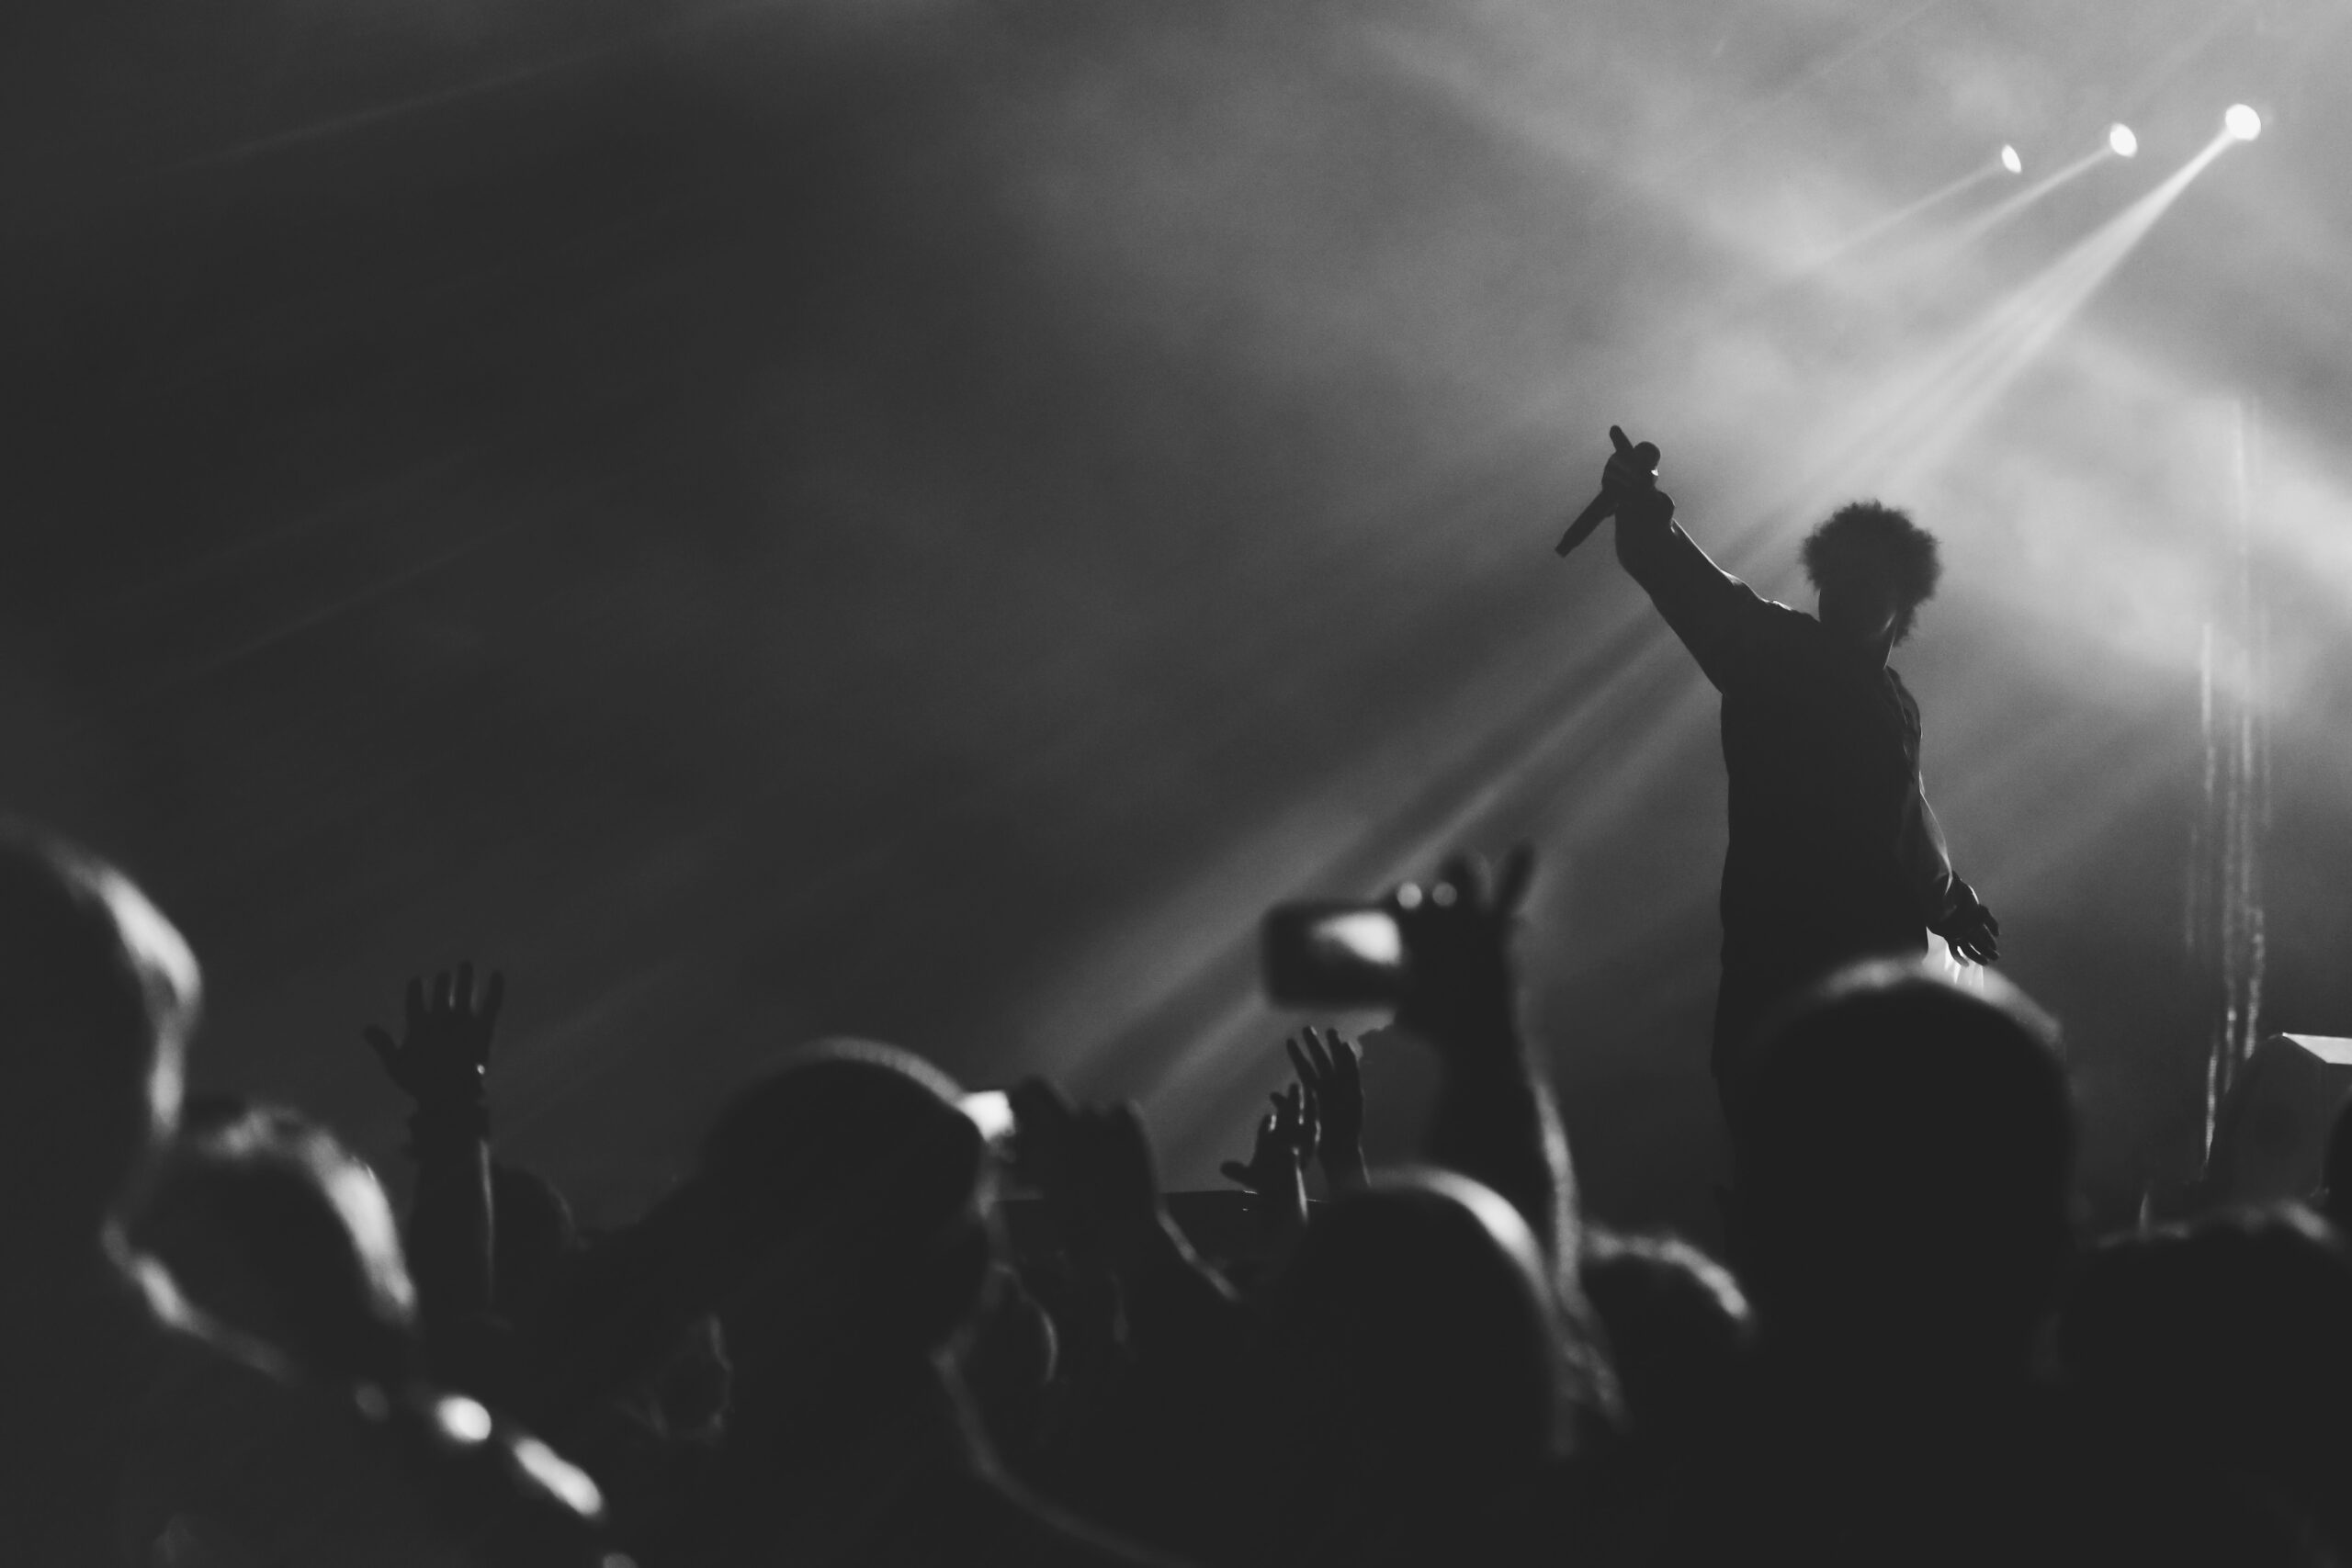 Black and white photo of frontman silhouette in a stage backligh